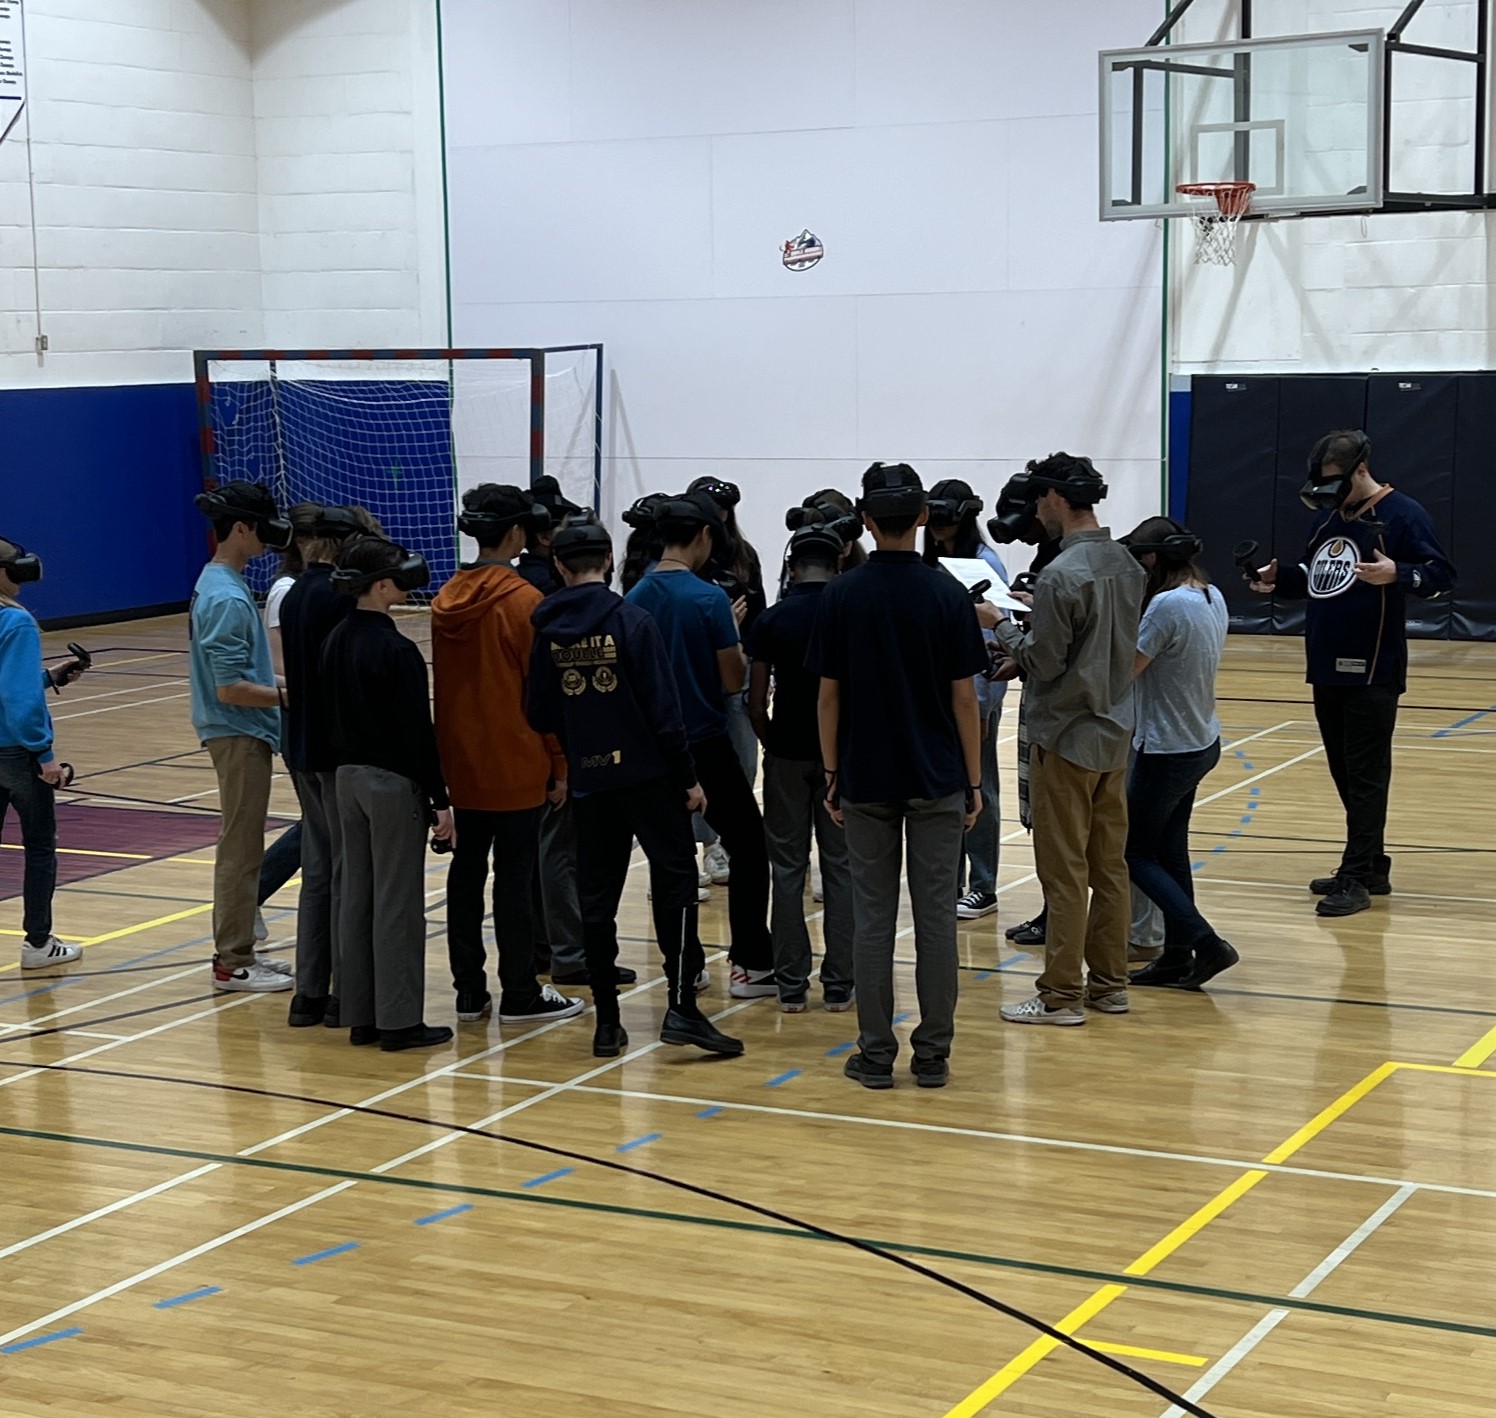 Students with VR